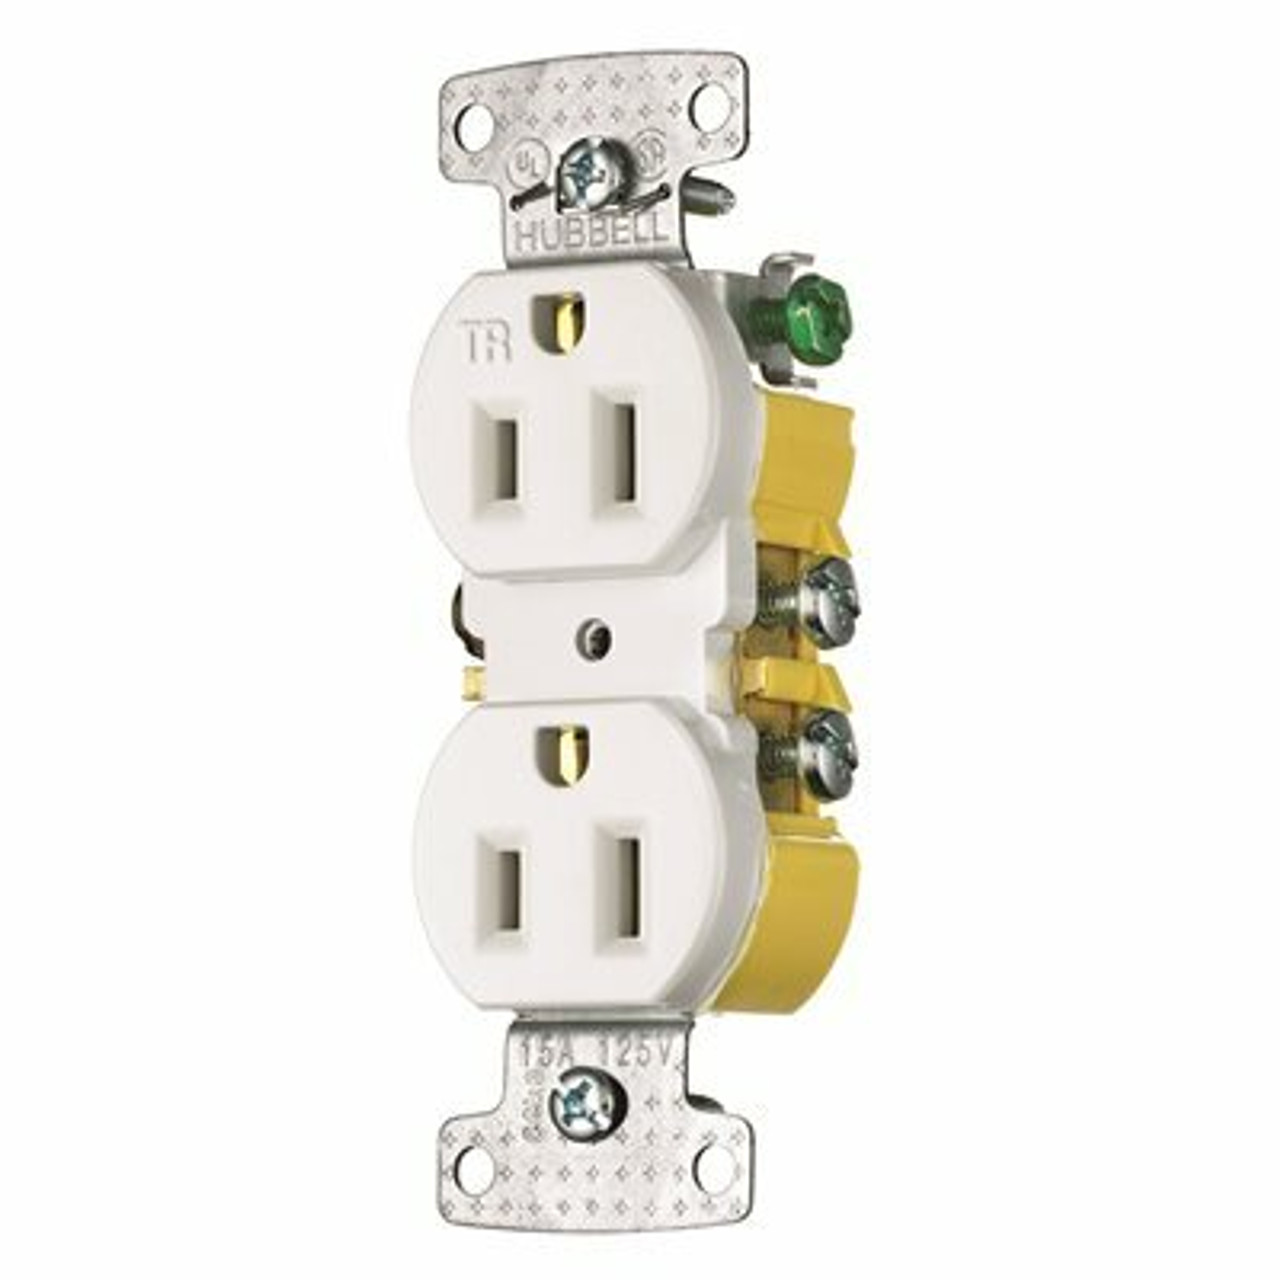 Hubbell Wiring 15 Amp Tamper Resistant Duplex Outlet, White